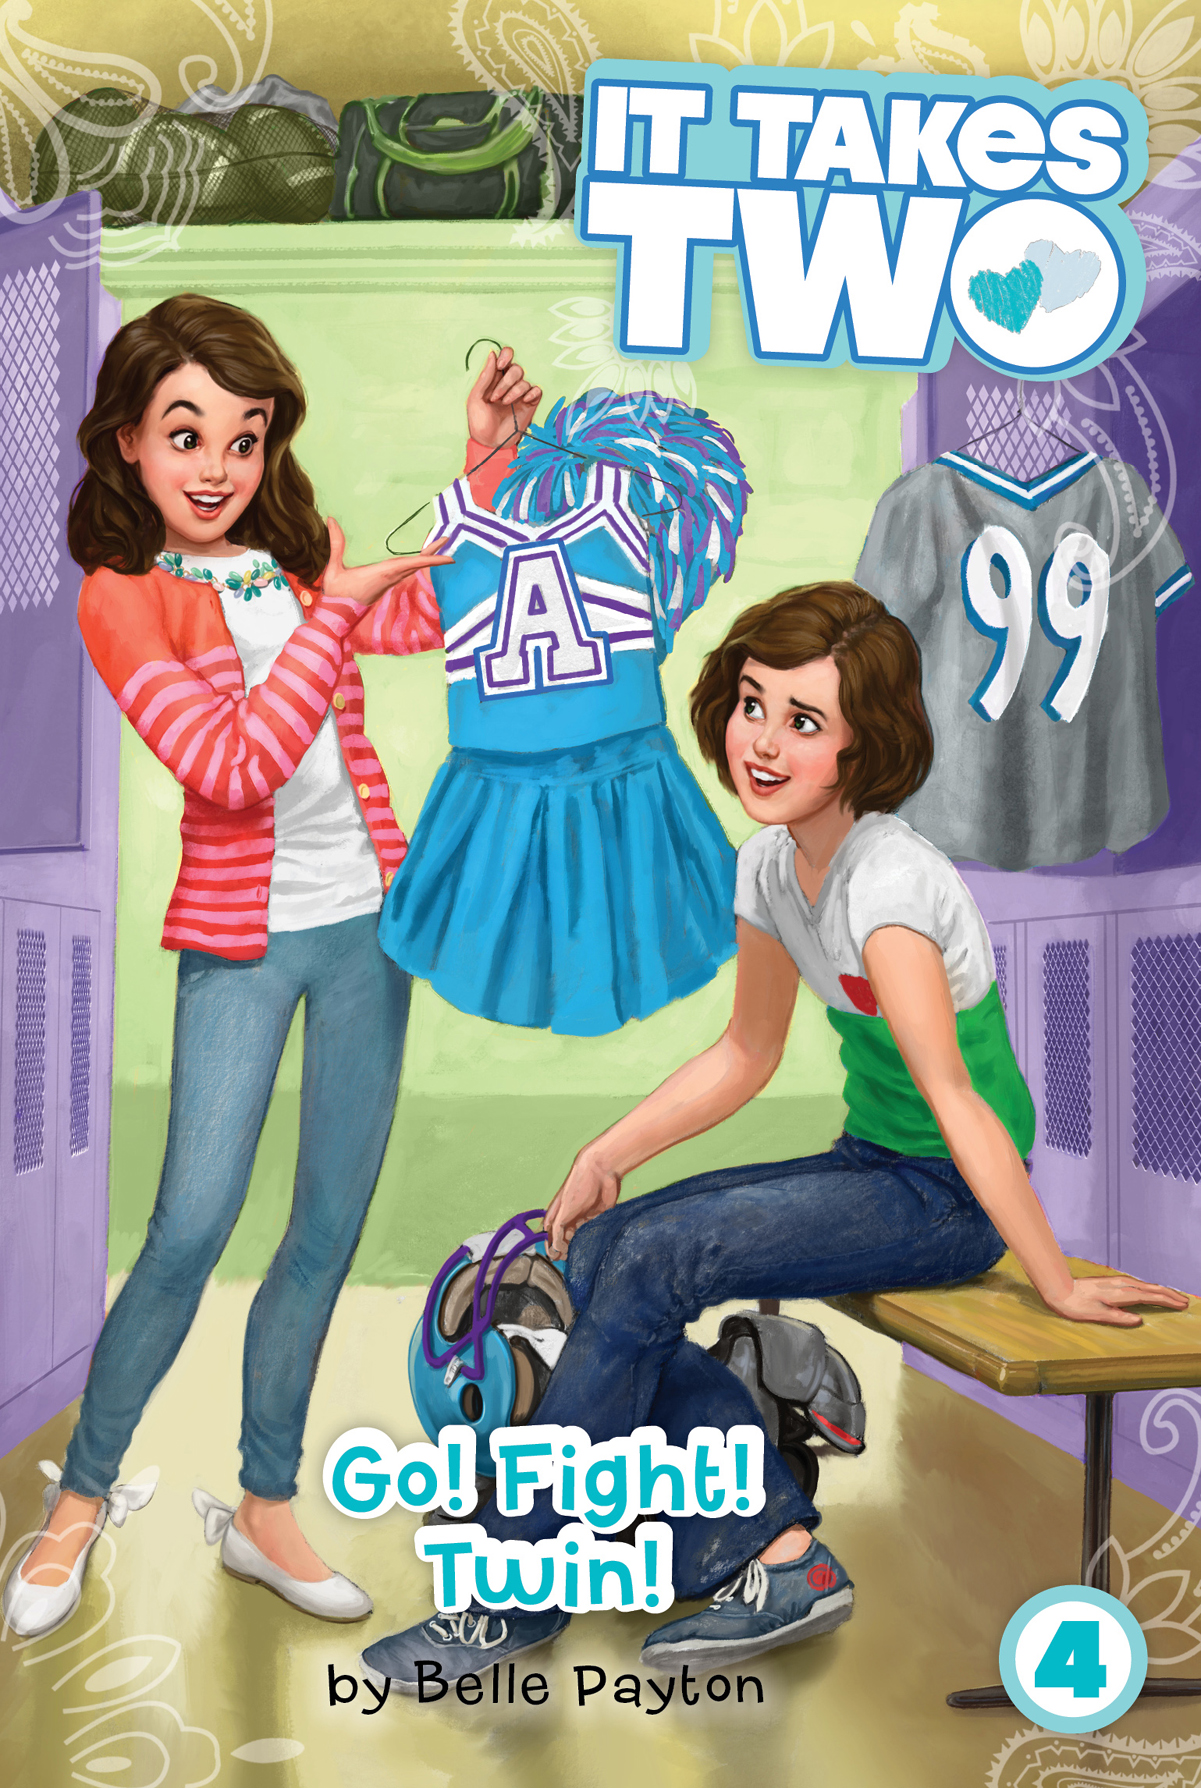 Go! Fight! Twin! by Belle Payton